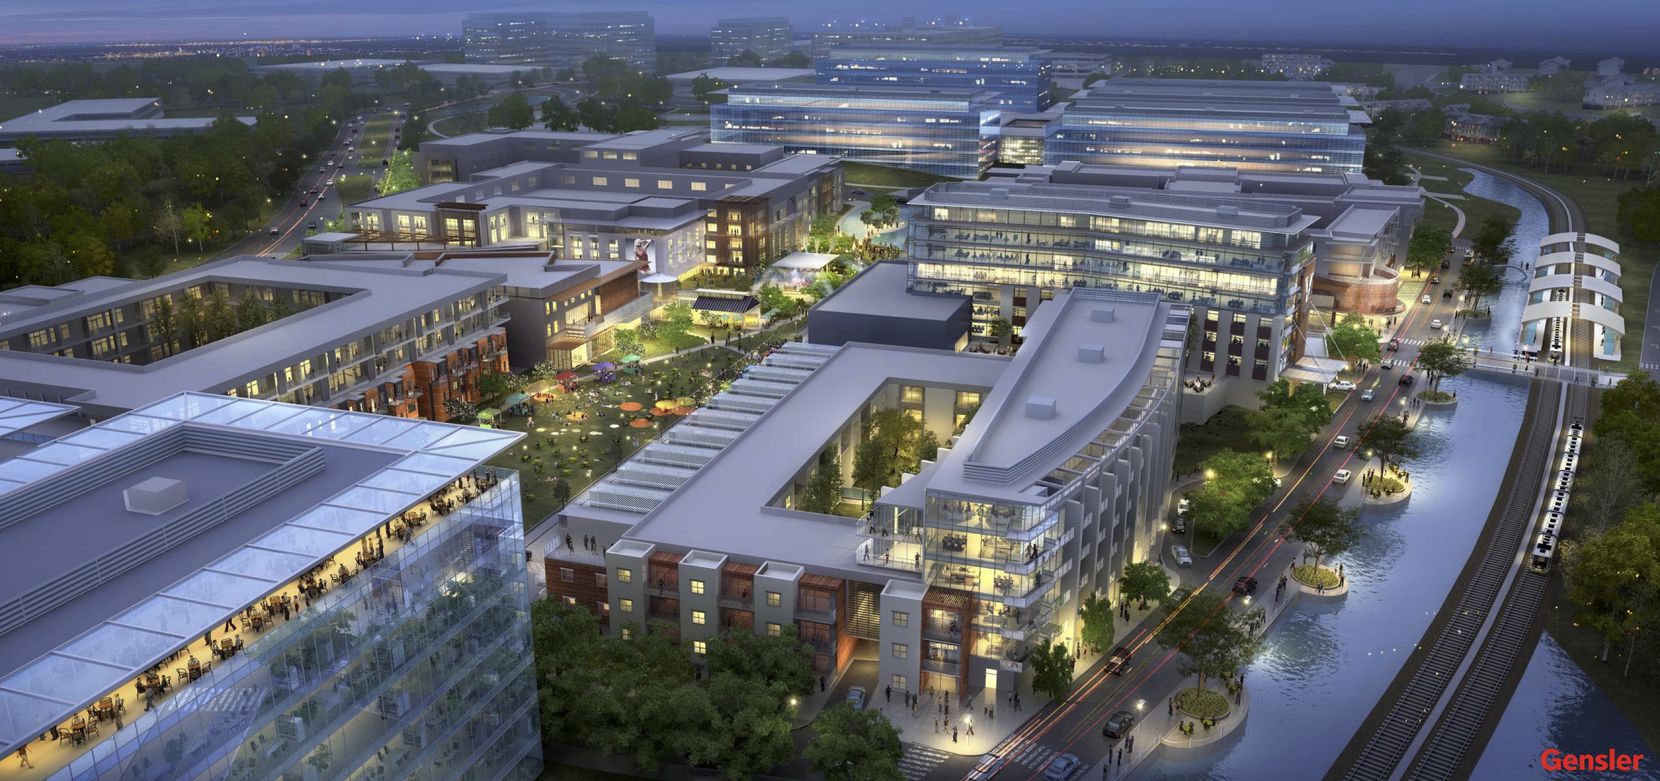 More than 3 million square feet of offices are planned for the 150 acres across from...